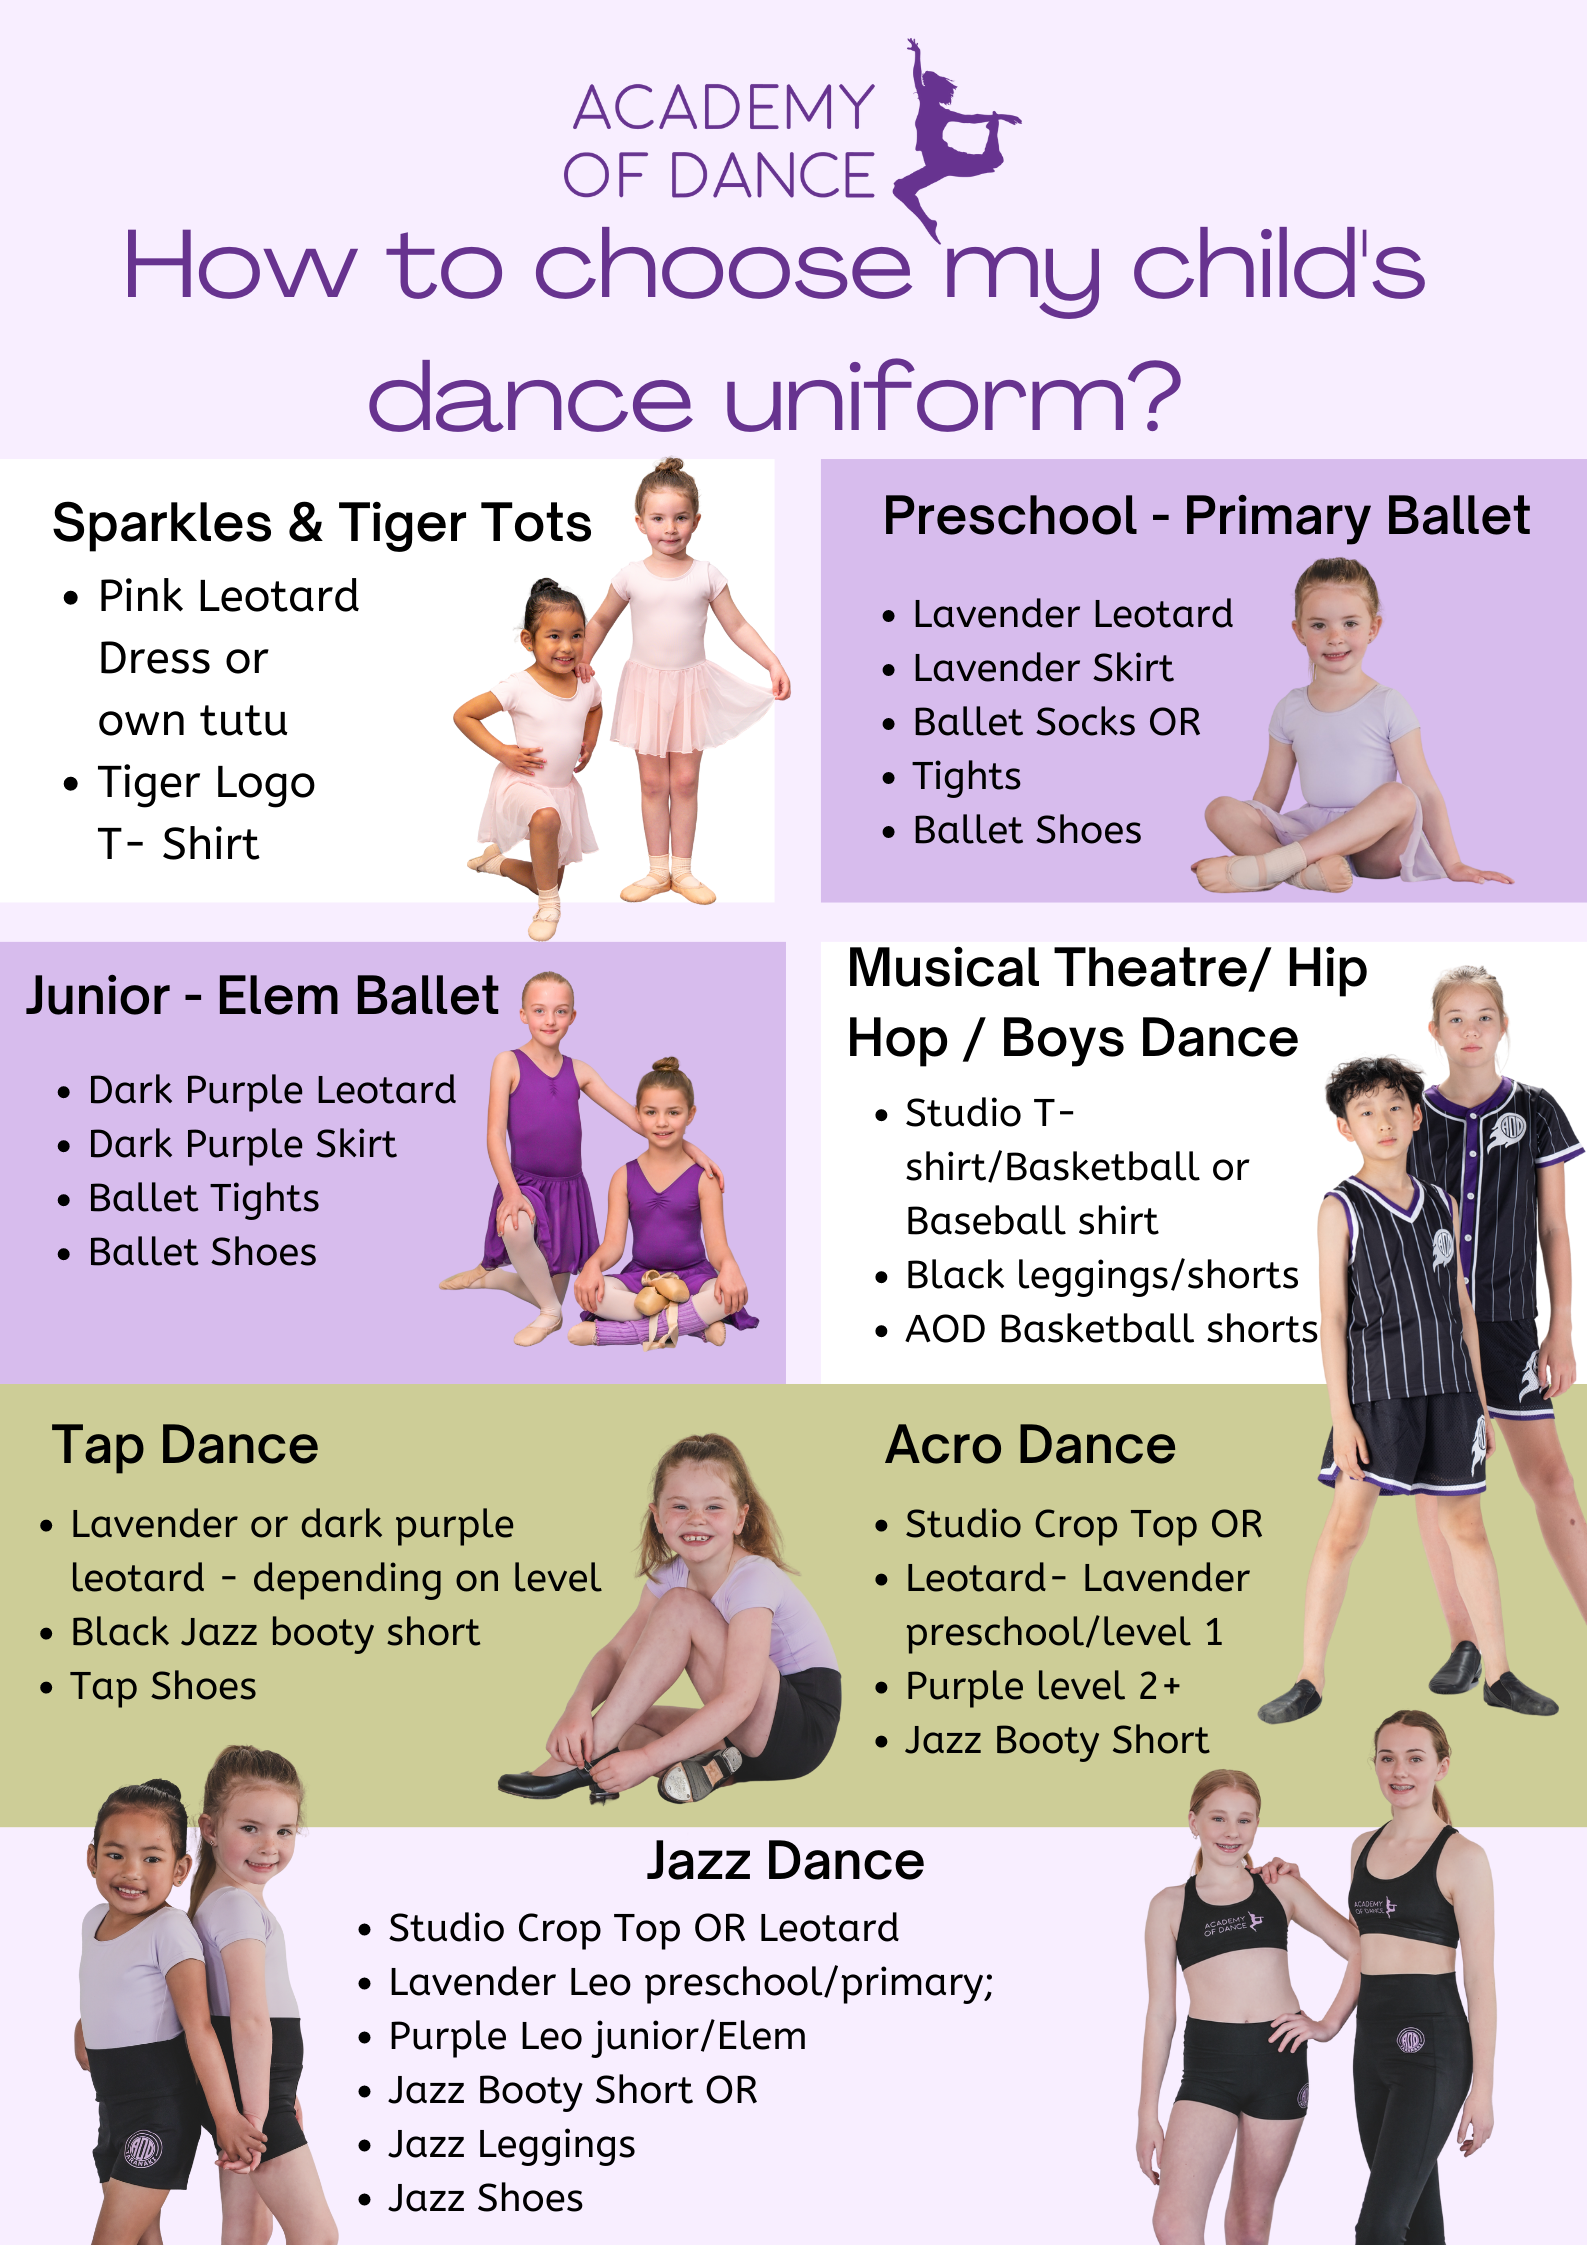 how to choose a dance uniform and outfit by Academy of Dance